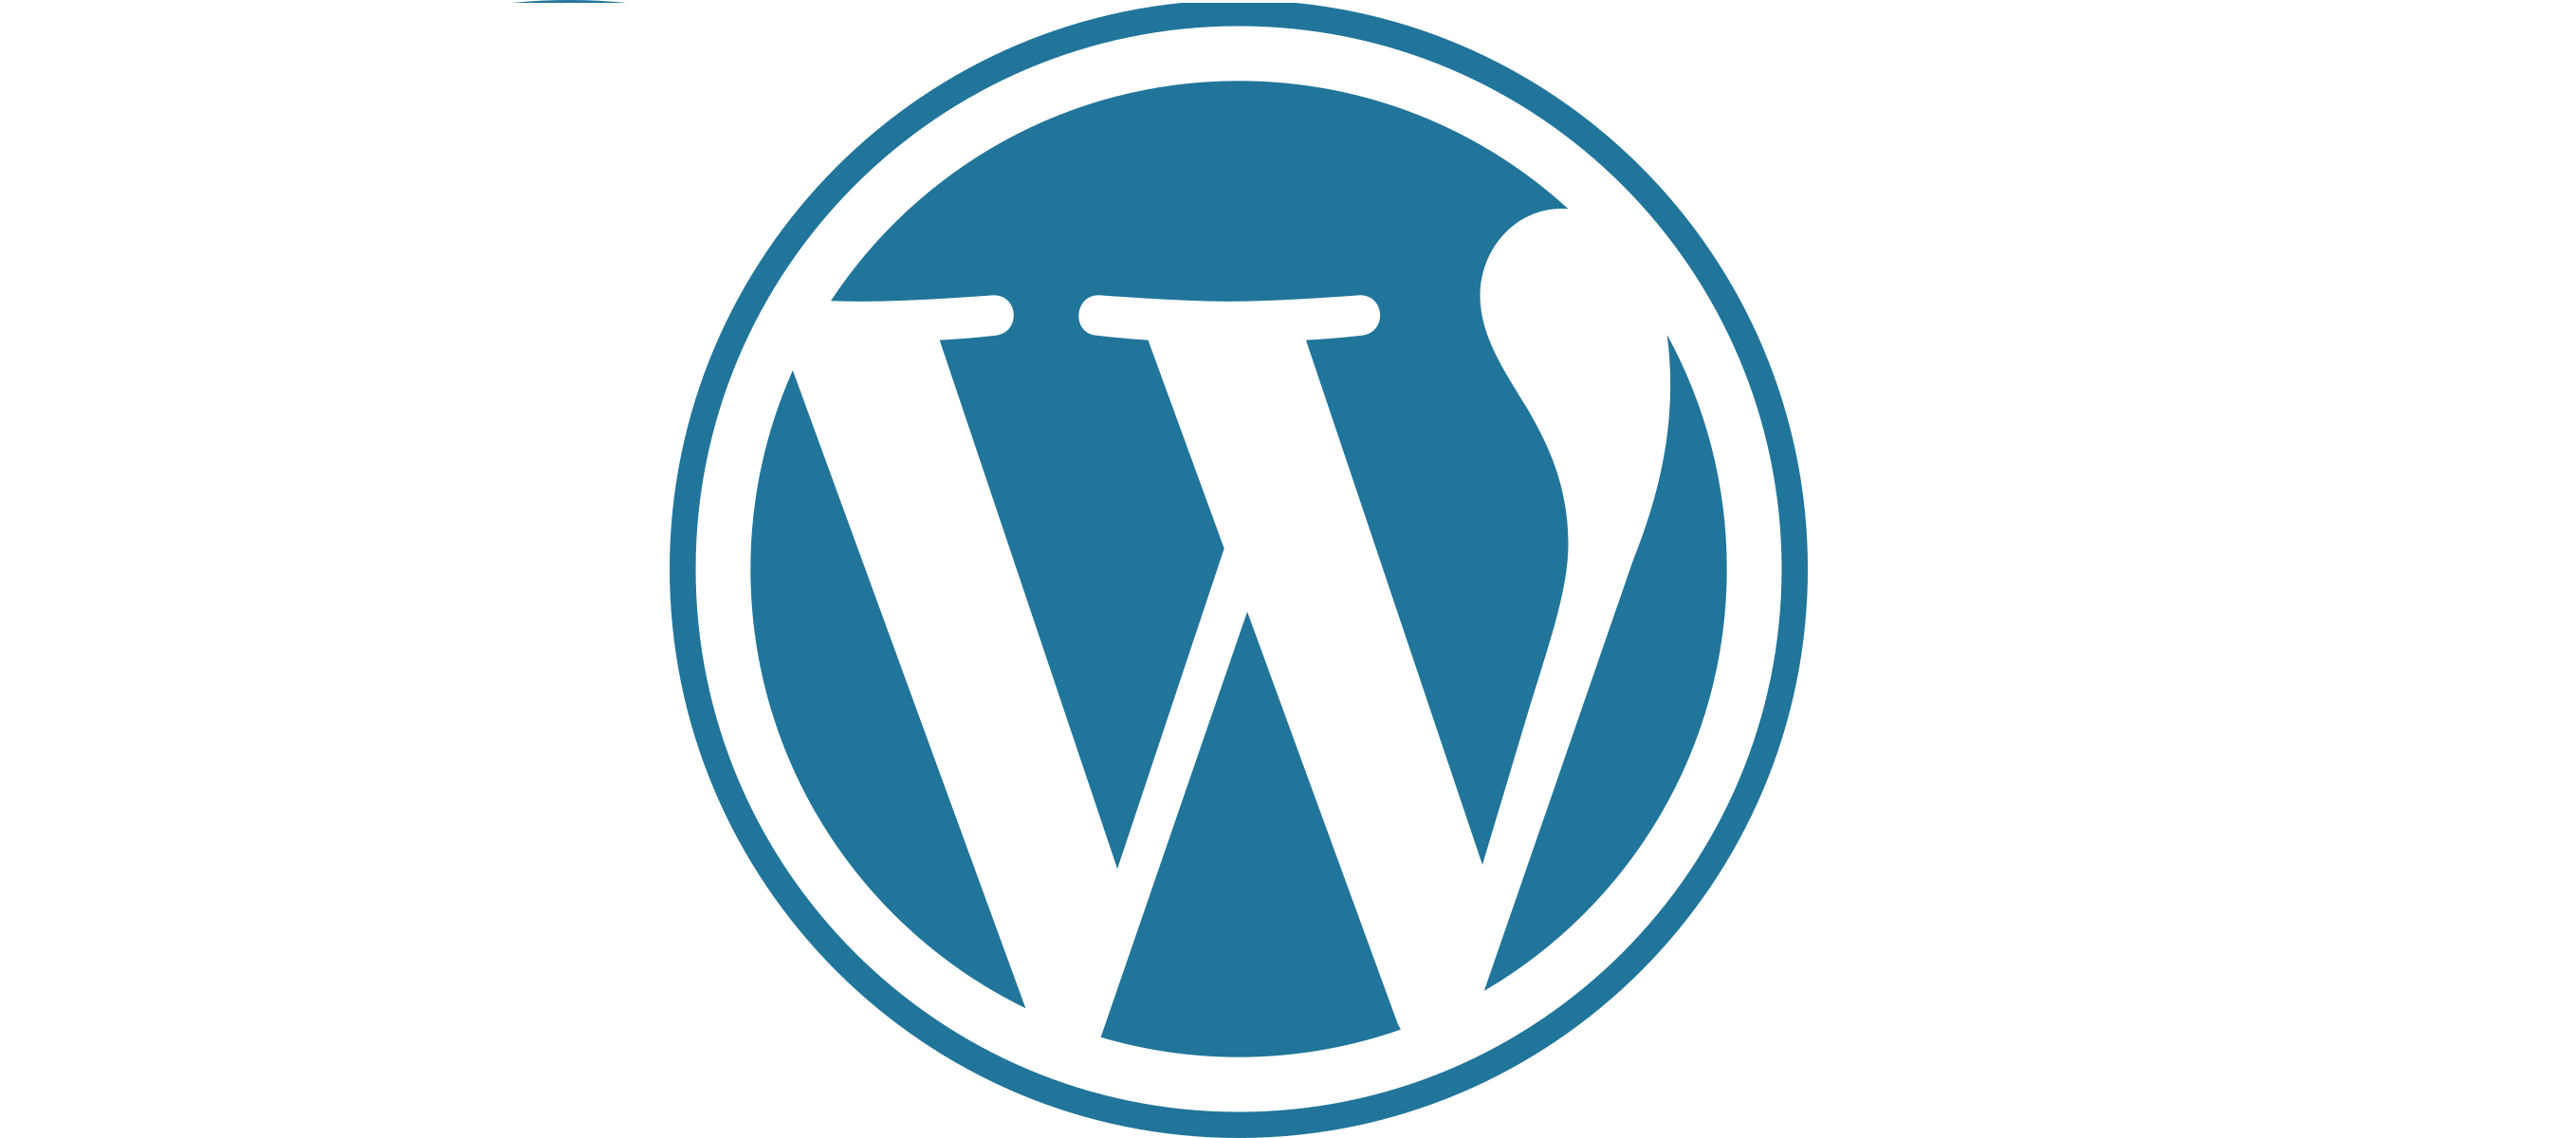 Download Why WordPress is awesome - MummeTech